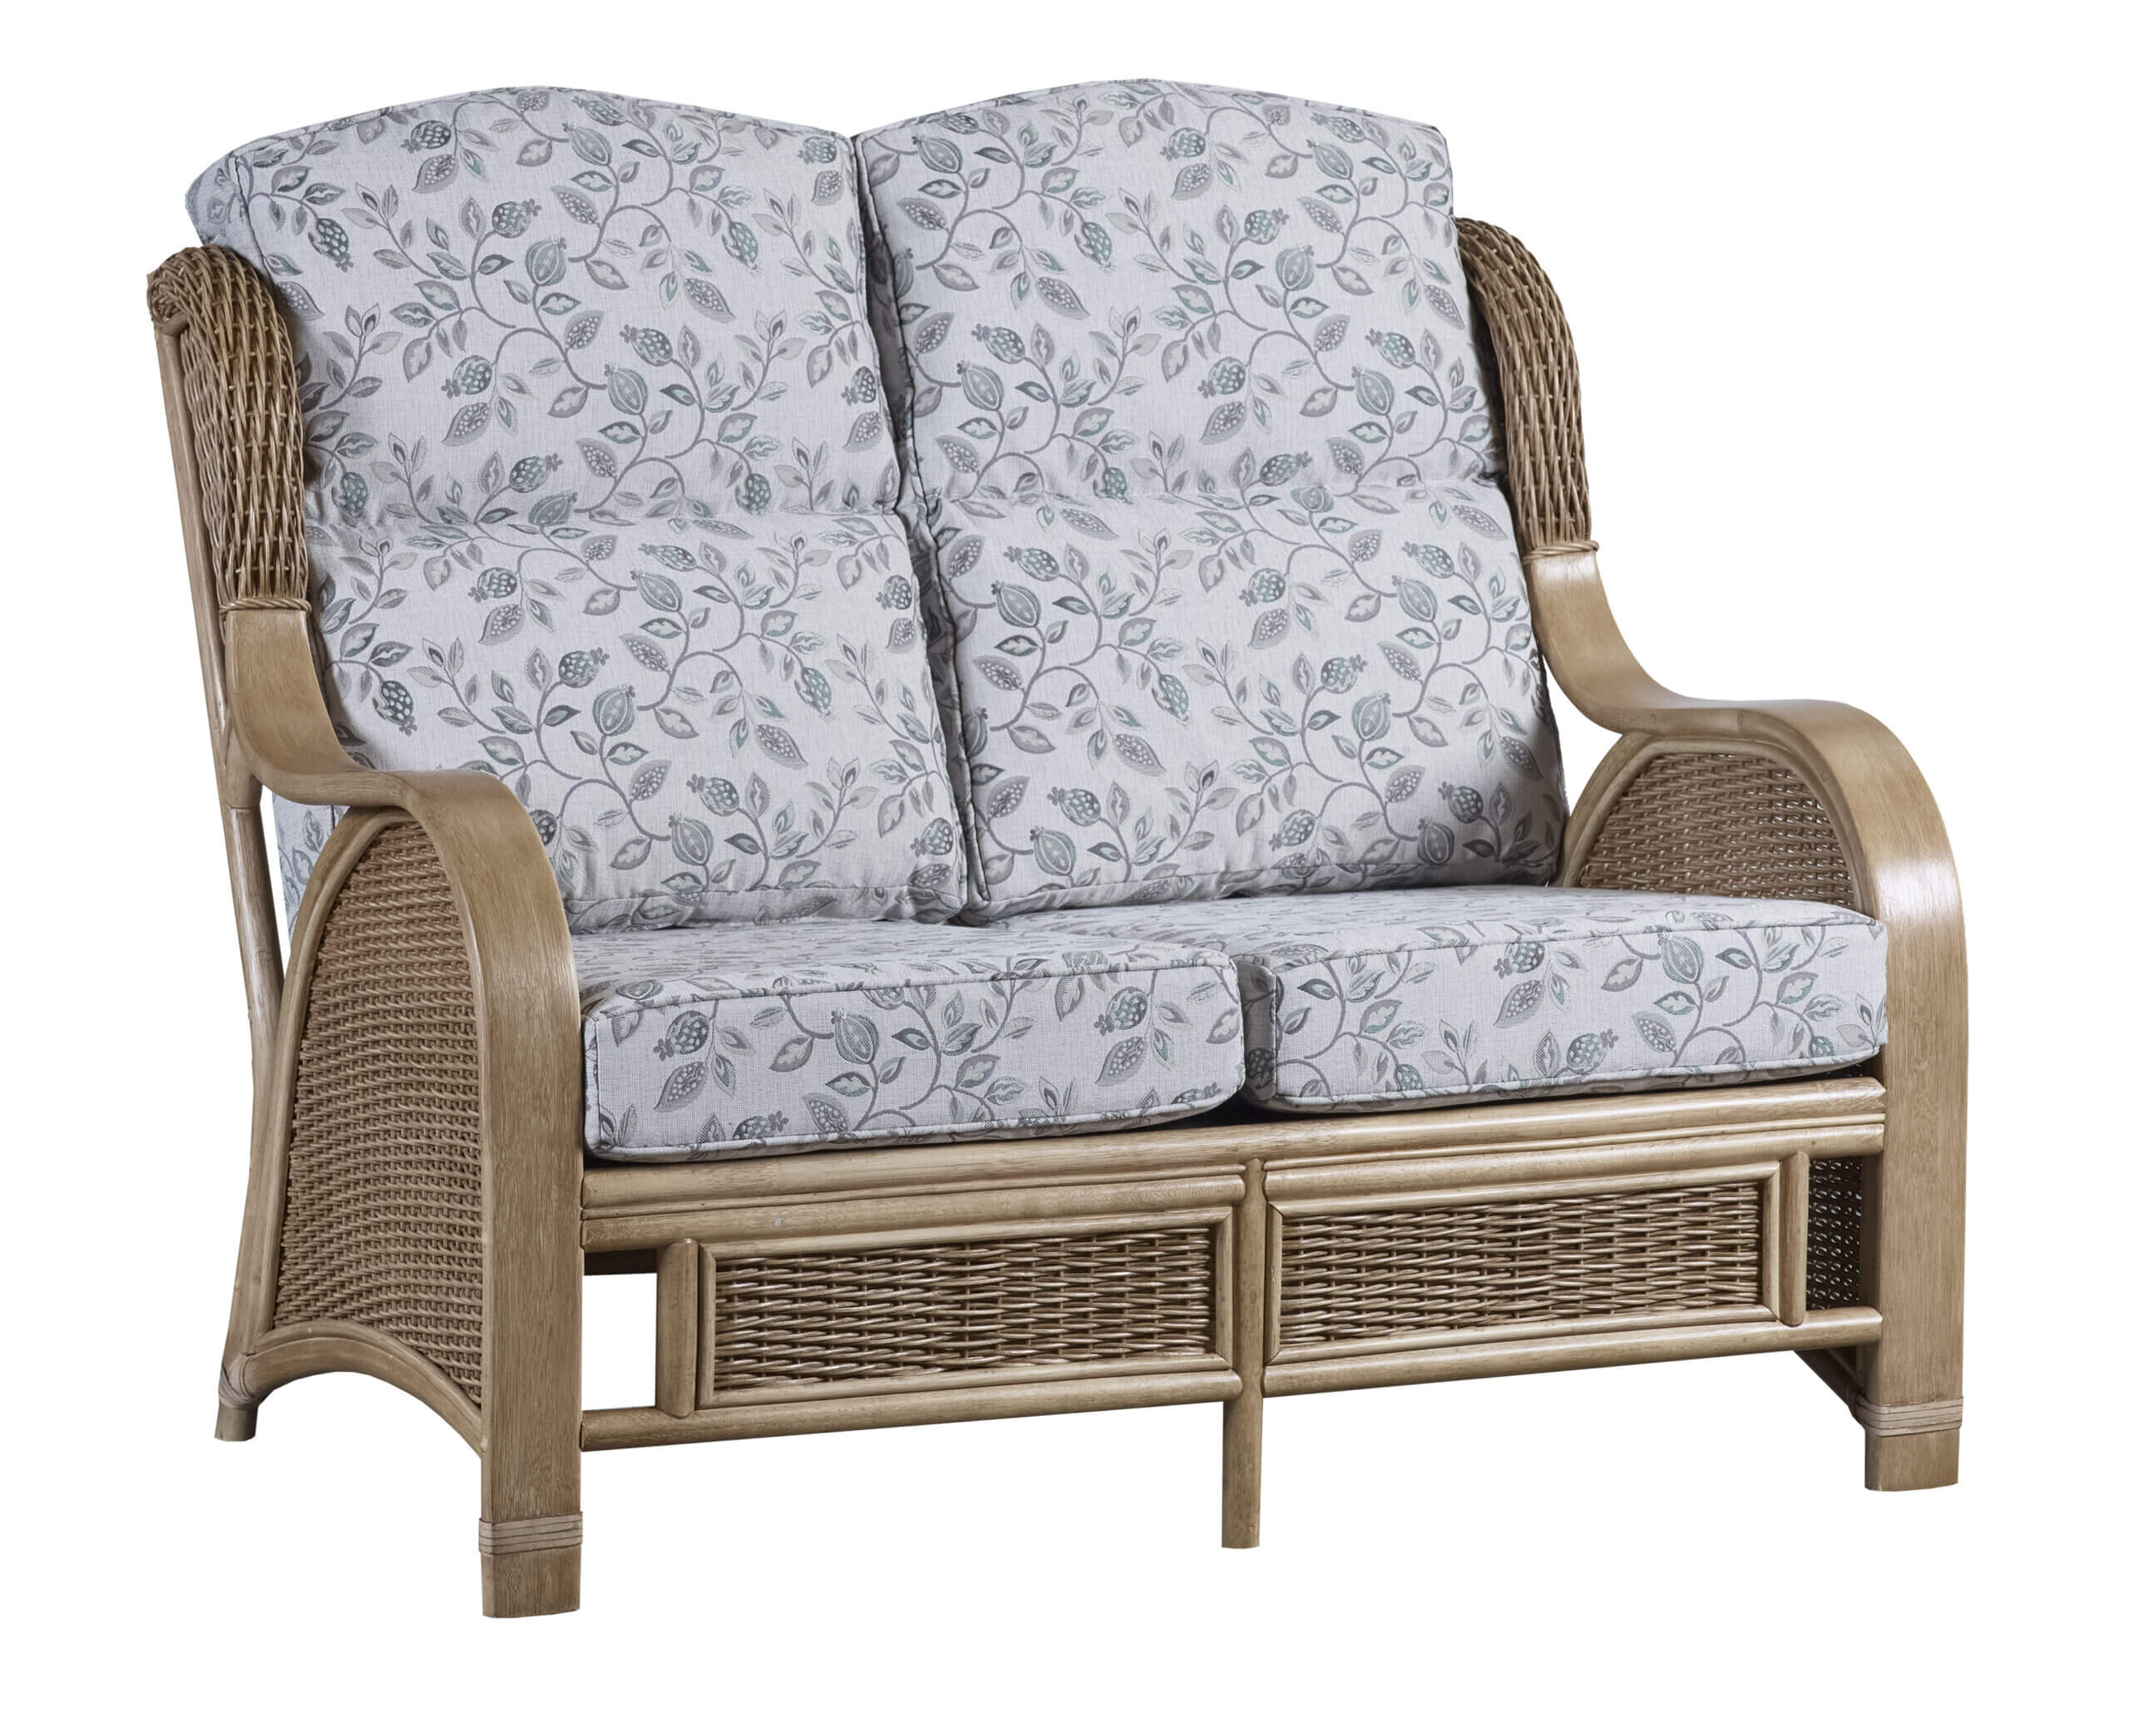 Showing image for Bari 2-seater sofa